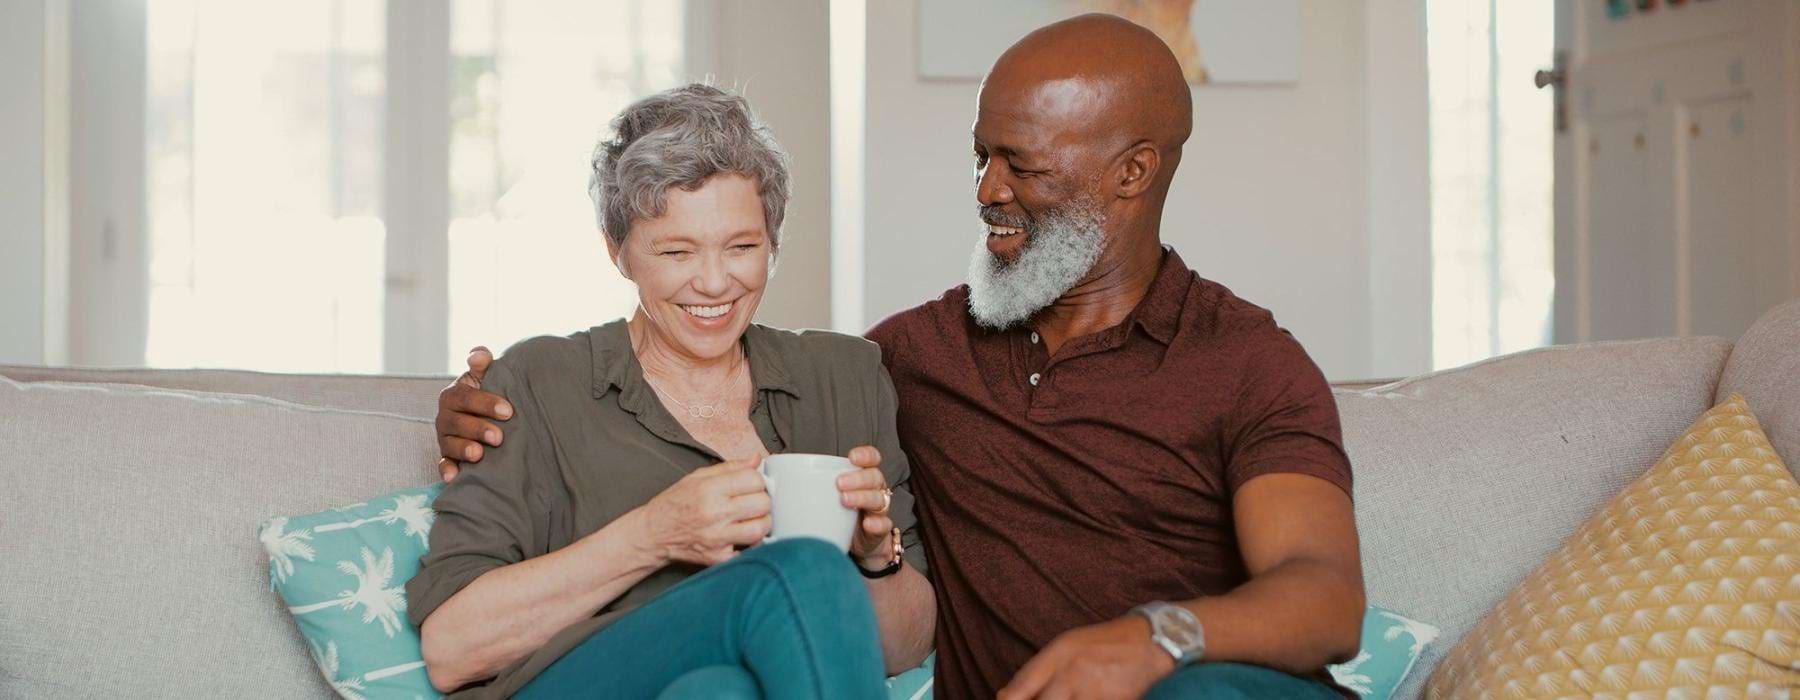 smiling, older couple, sit together on a couch